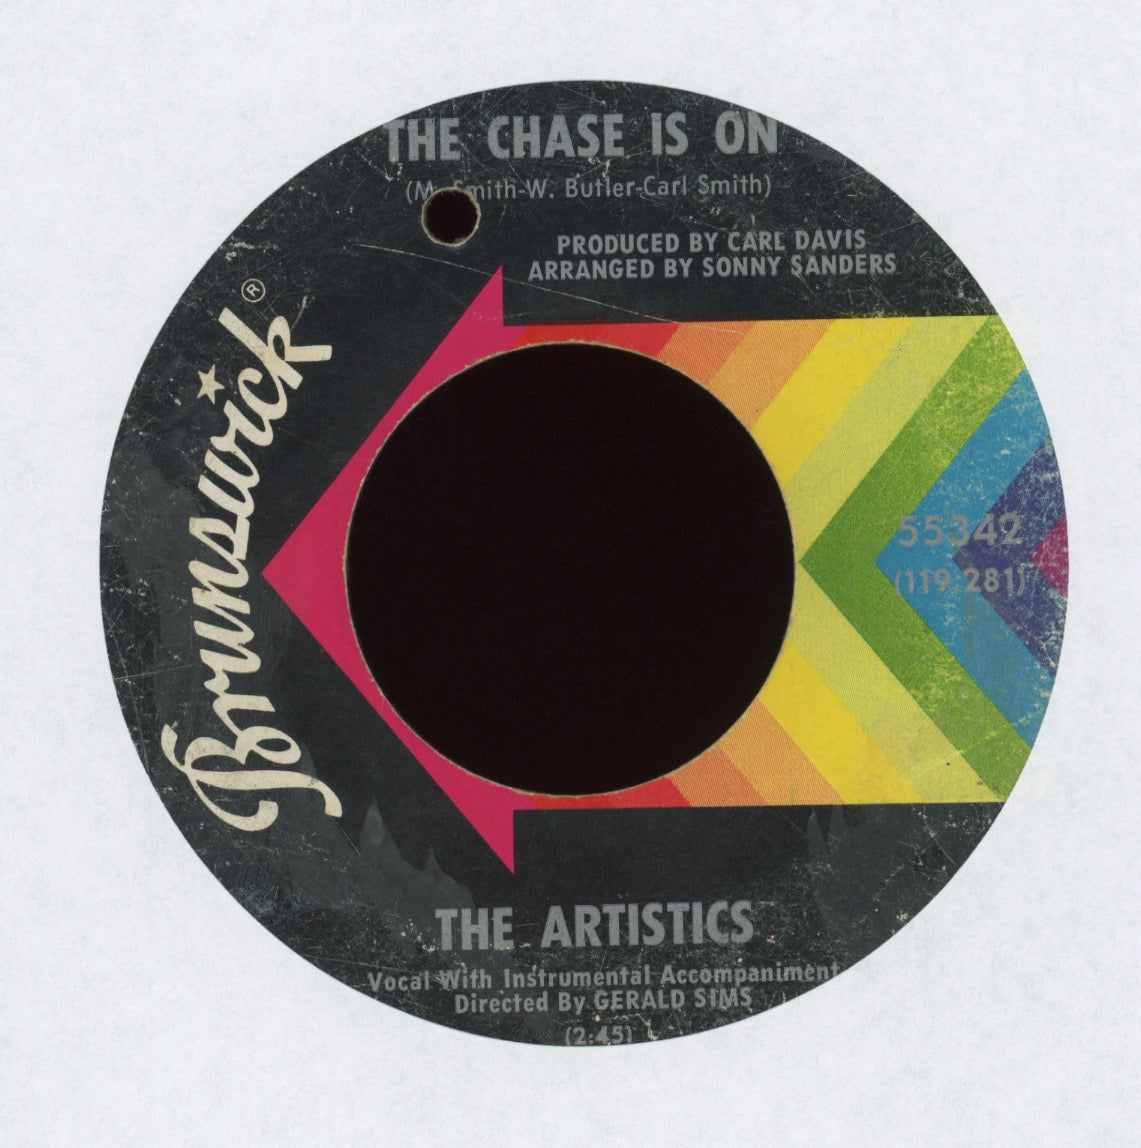 The Artistics - The Chase Is On on Brunswick